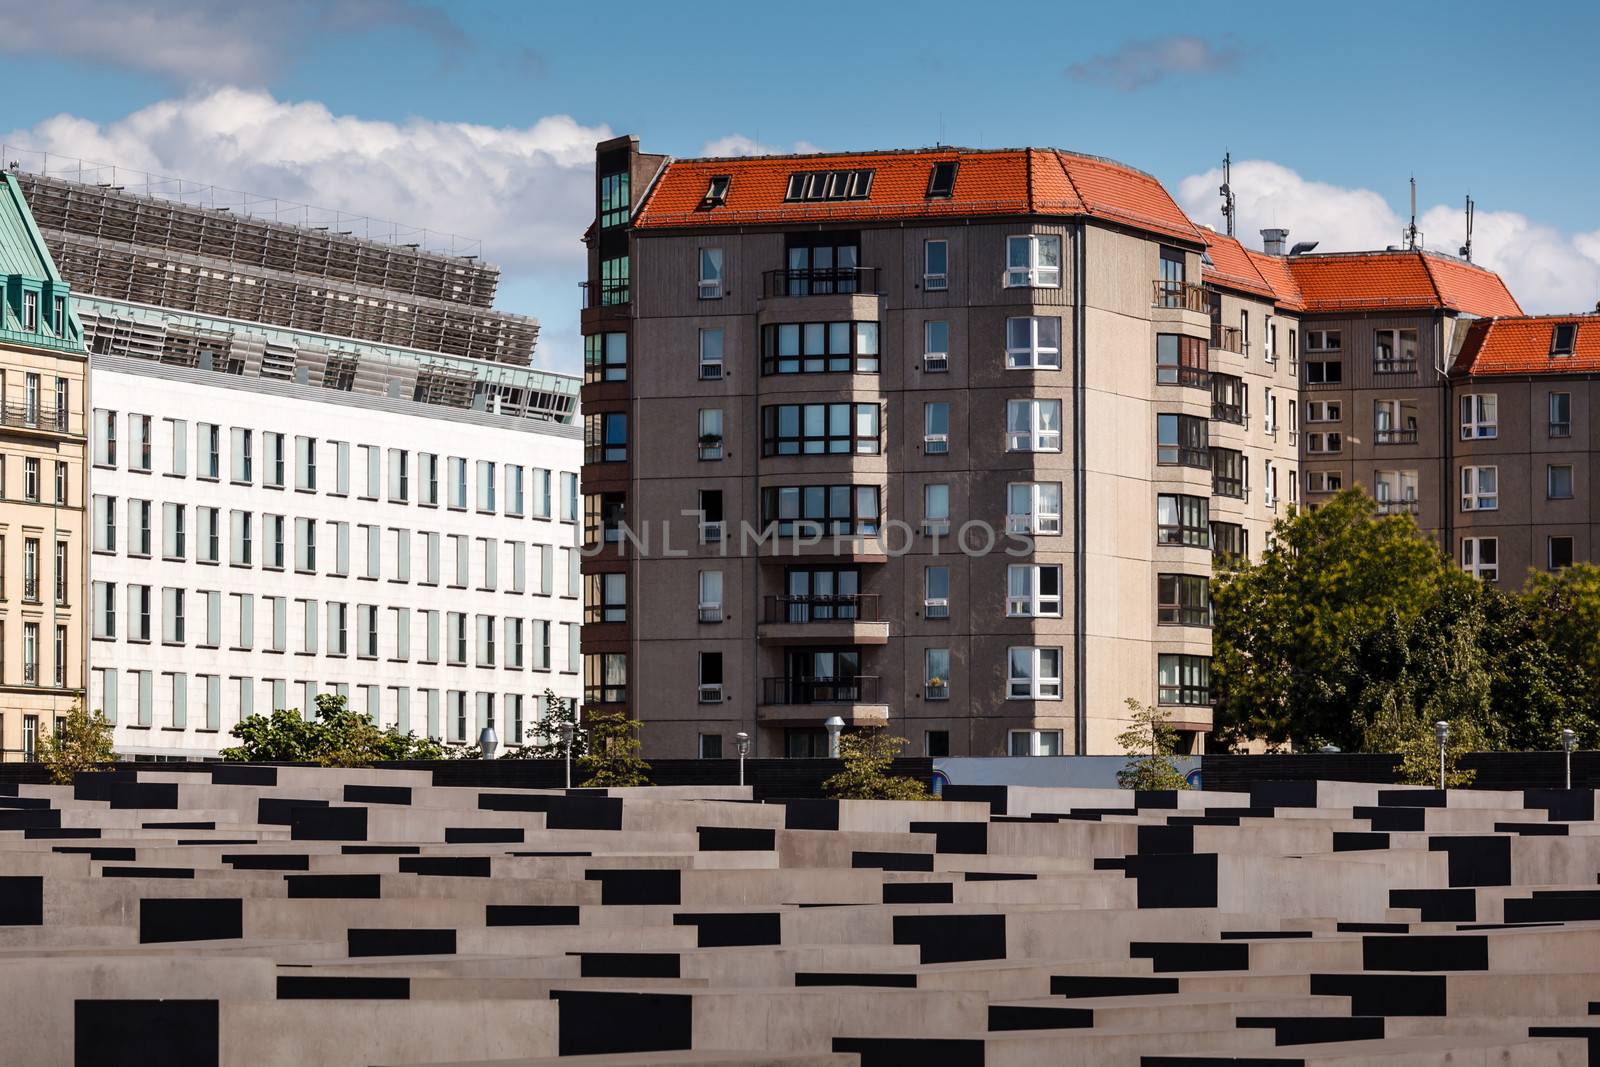 The Jewish Holocaust Memorial in Central Berlin, Germany